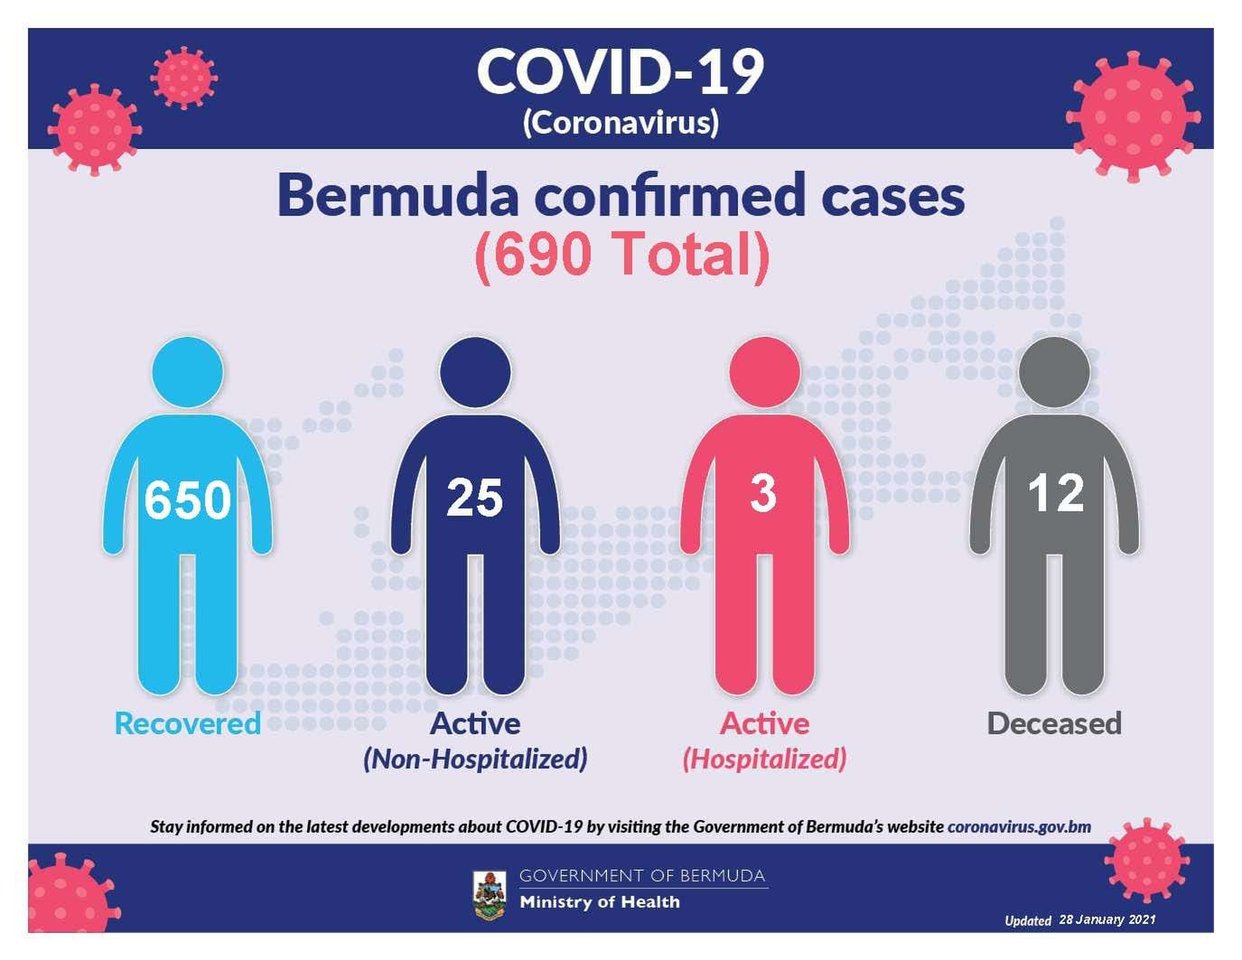 One new COVID-19 case reported in Bermuda, January 28